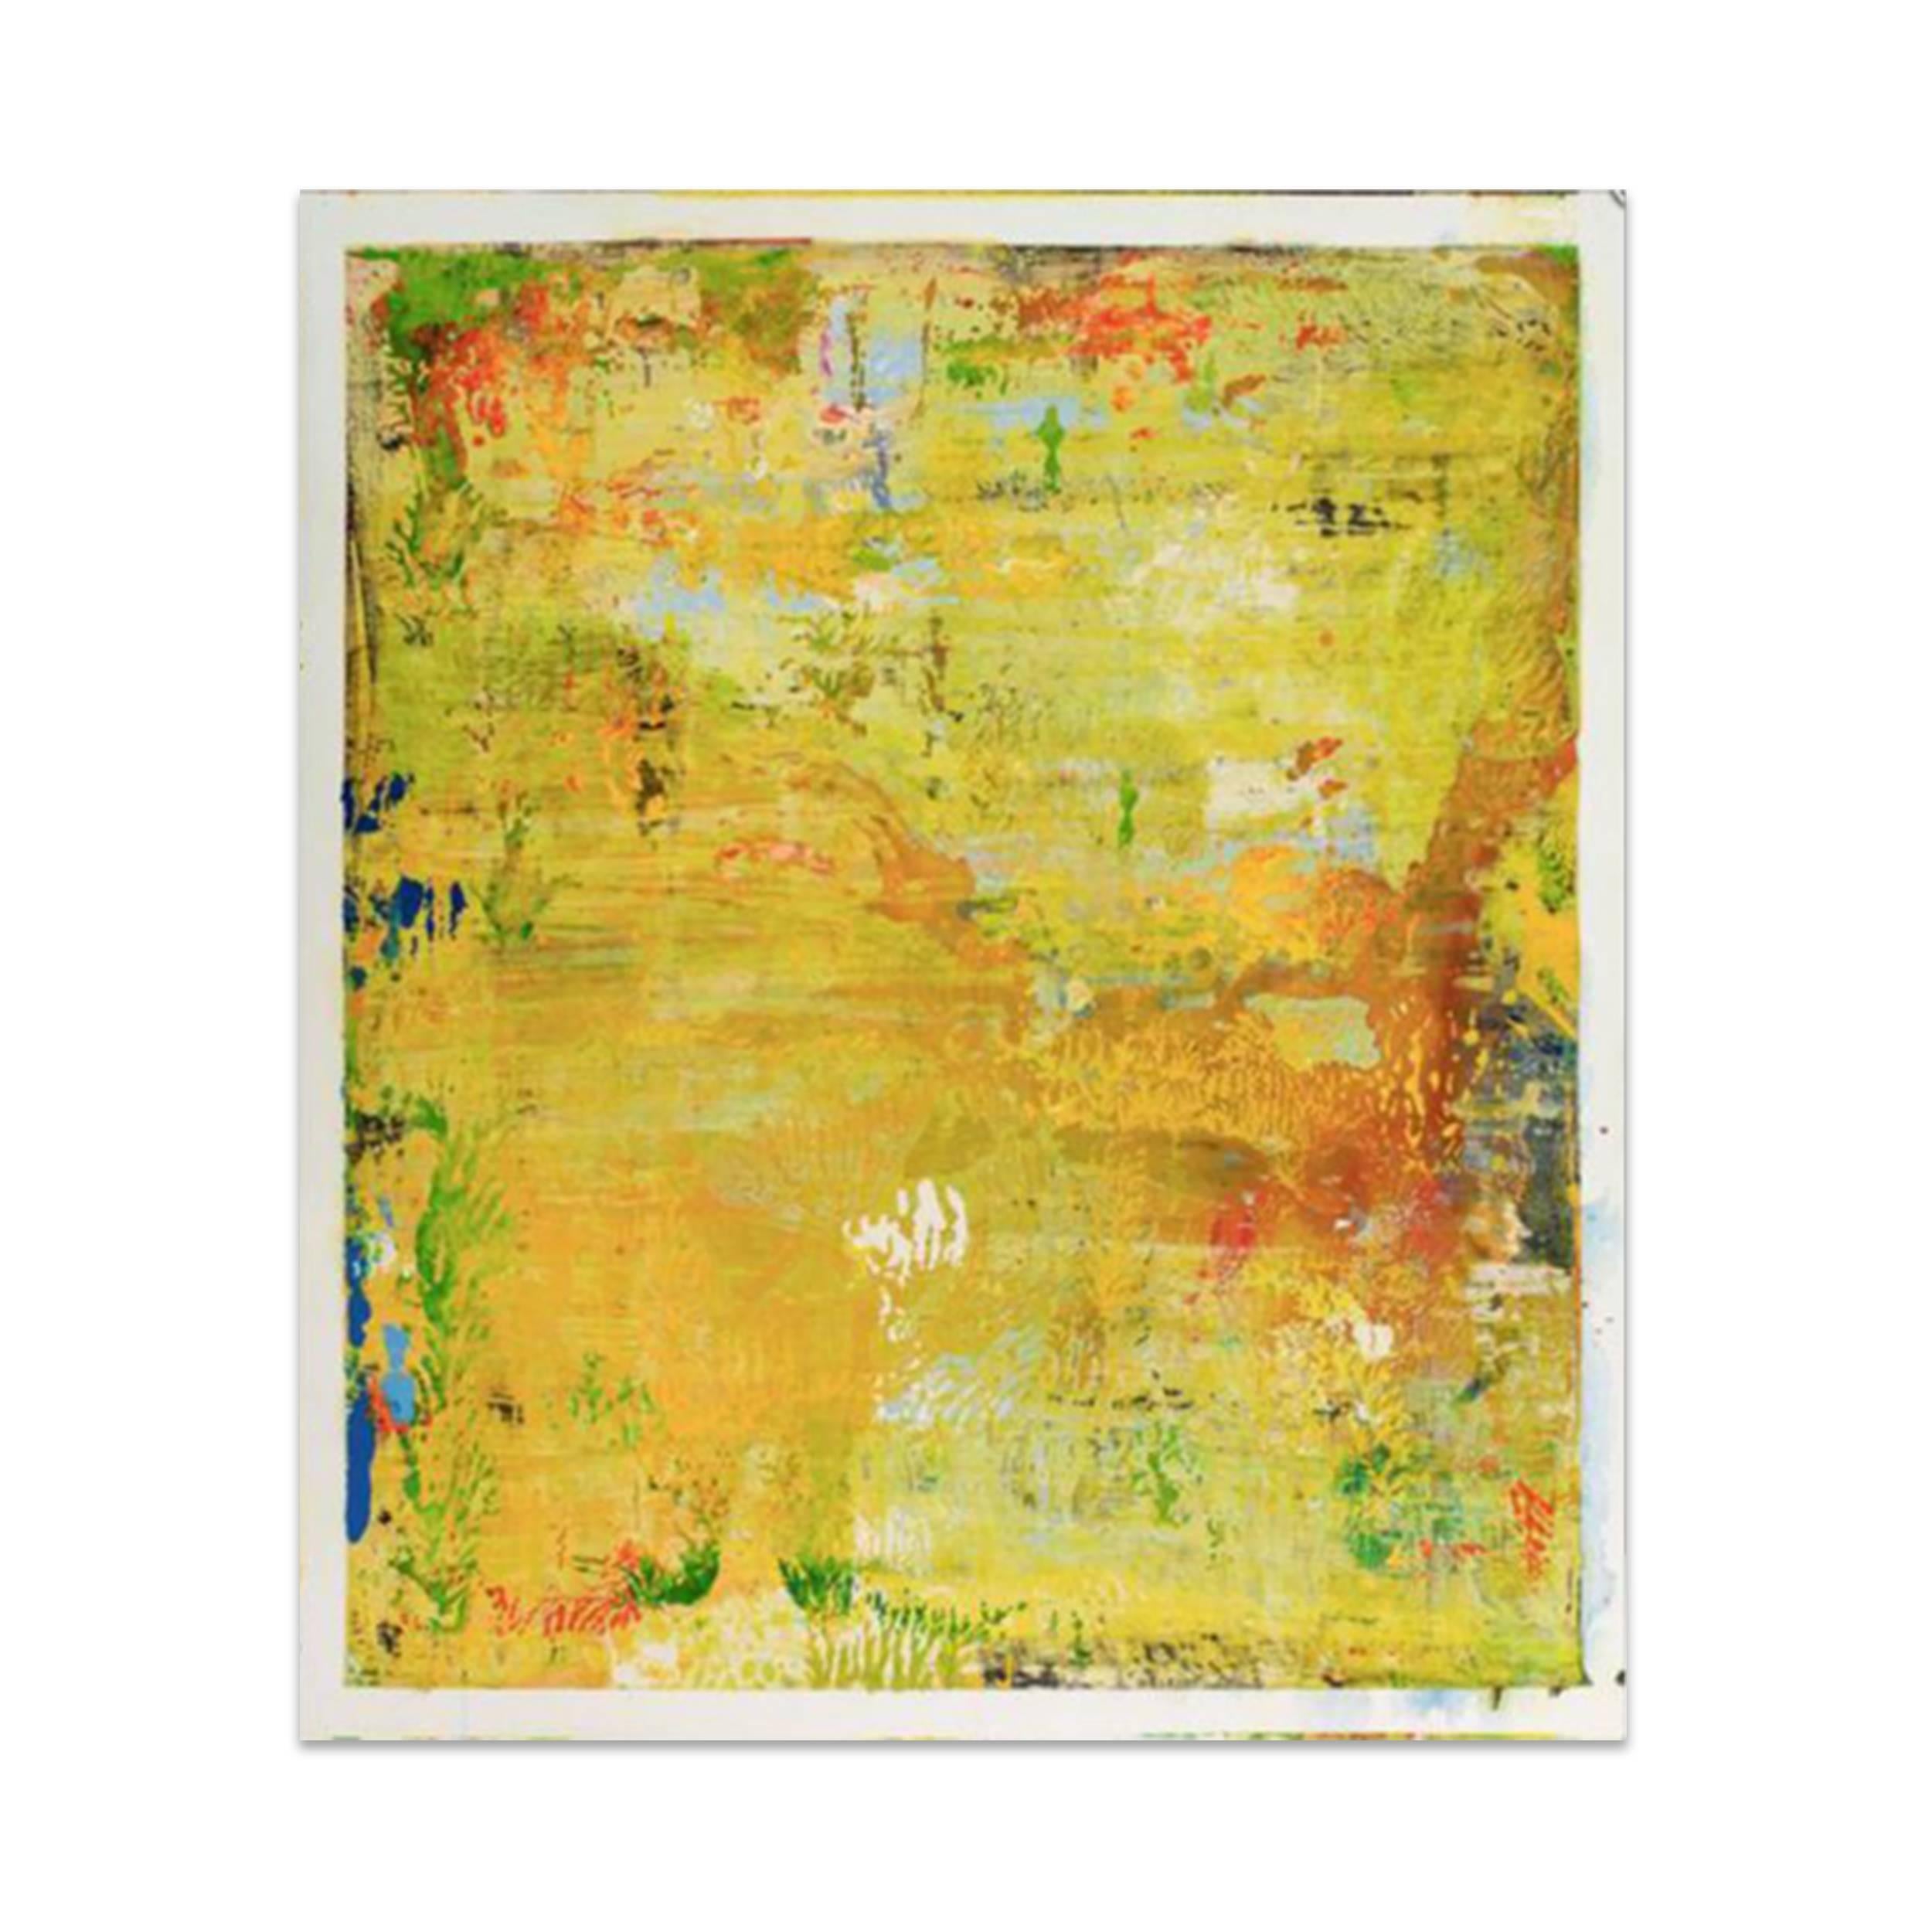 Bernd Haussmann Abstract Painting - 2467 RED, GREEN, YELLOW, AND BLUE